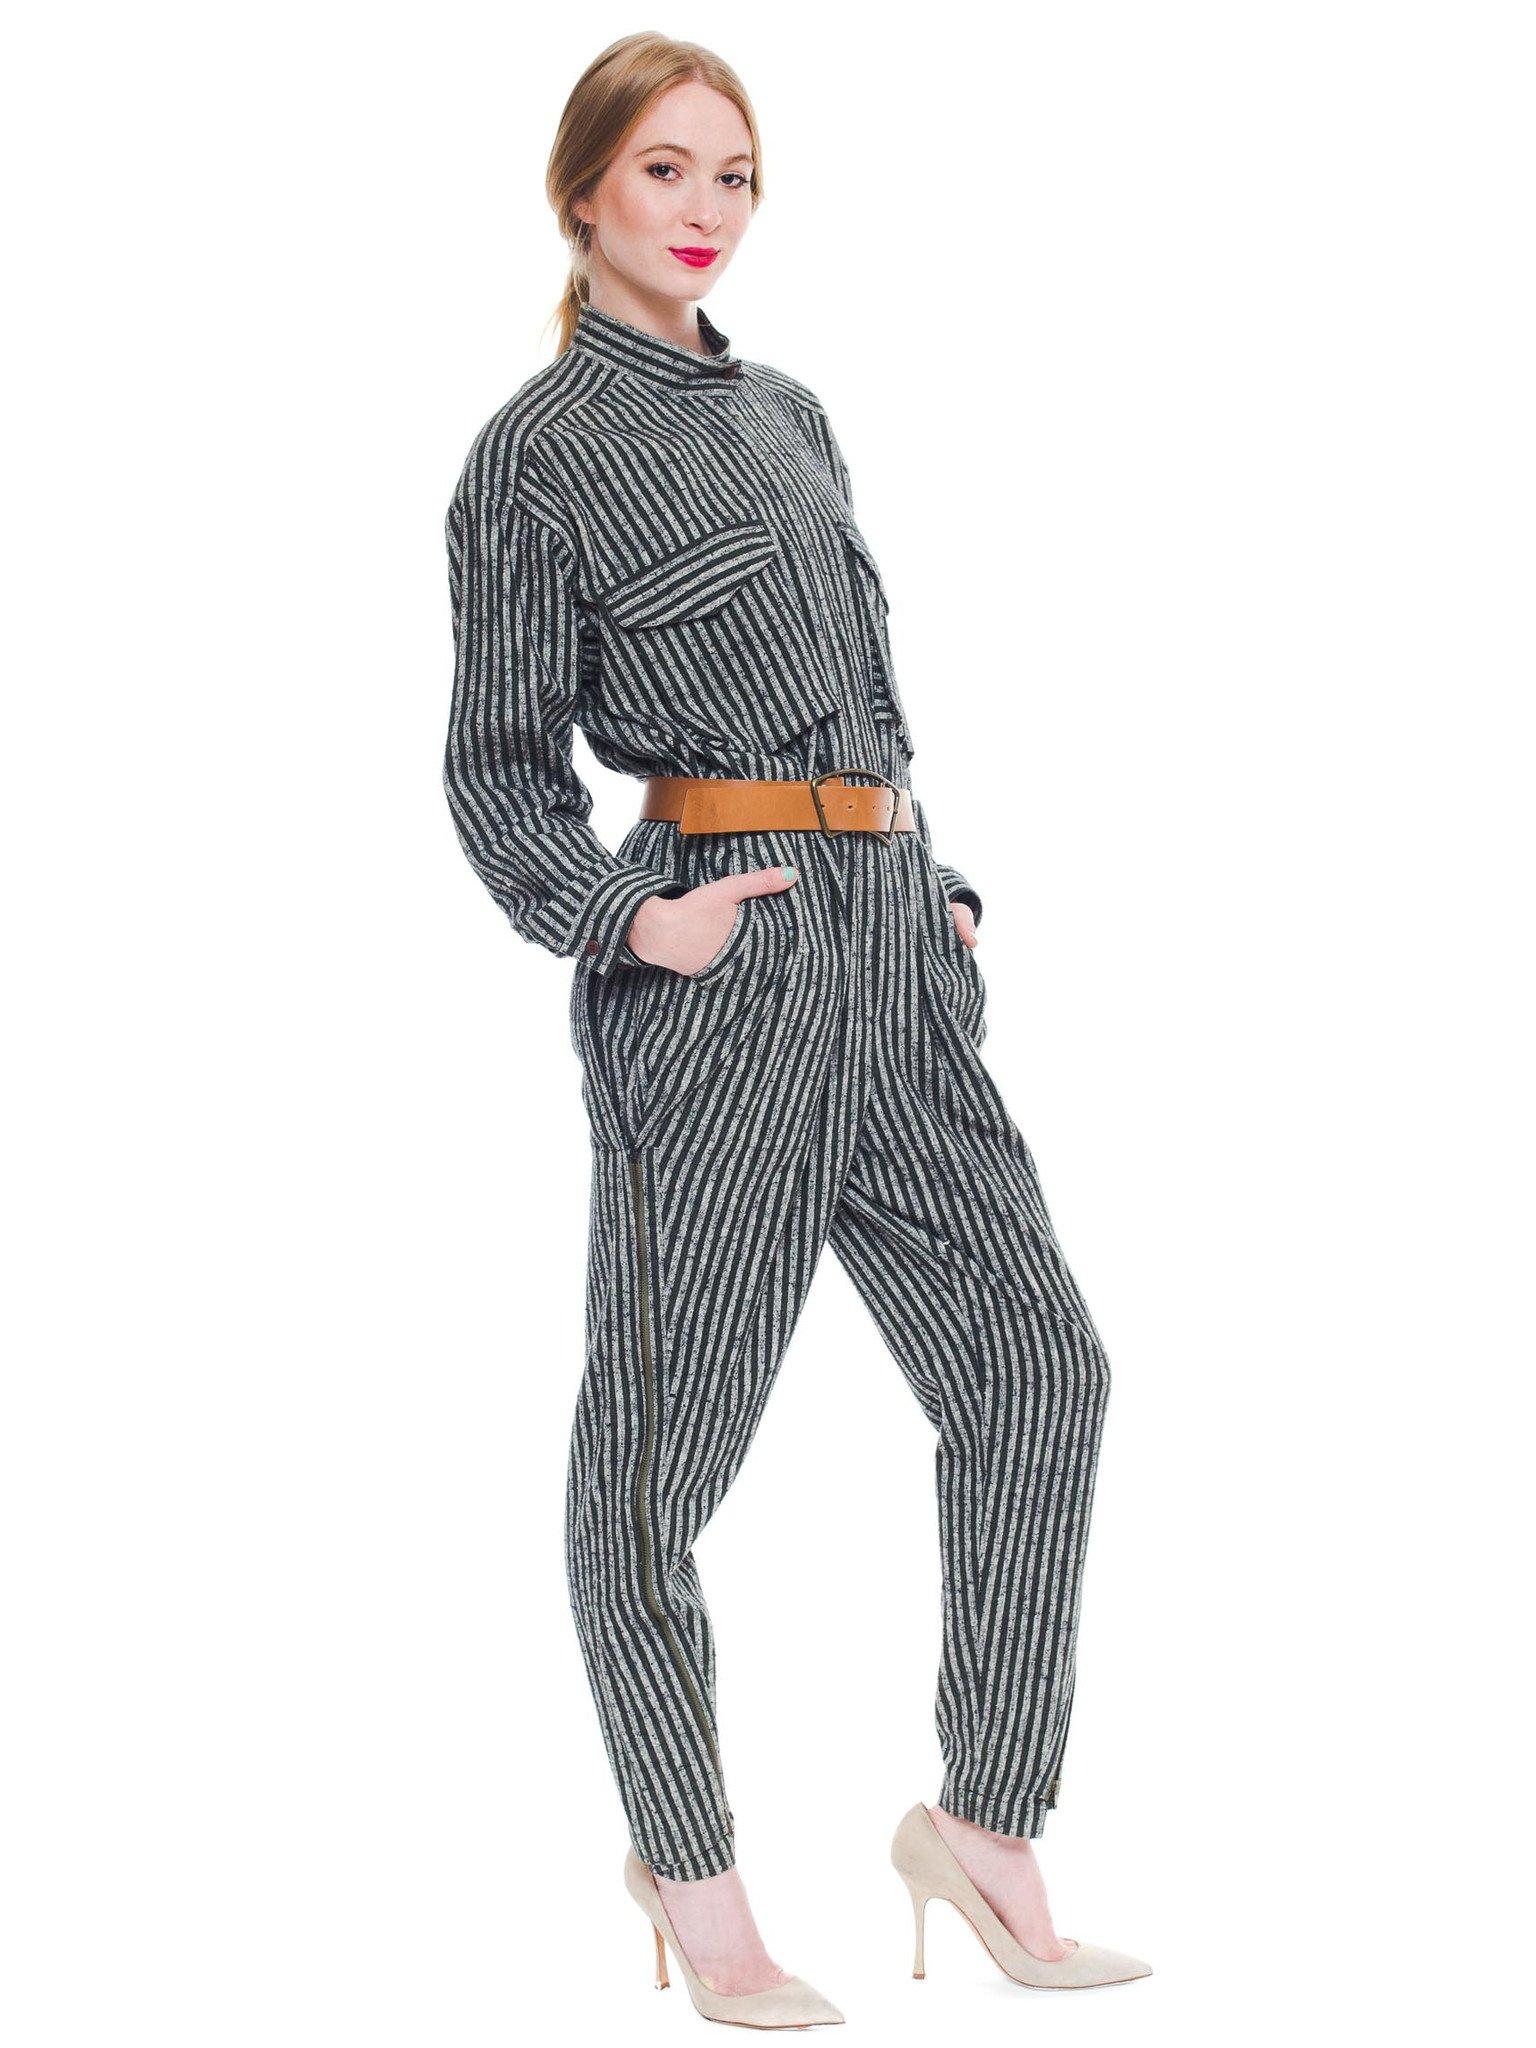 1980S ISSEY MIYAKE Dark Green & White Striped Cotton Utility Jumpsuit (Belt Not In Excellent Condition In New York, NY